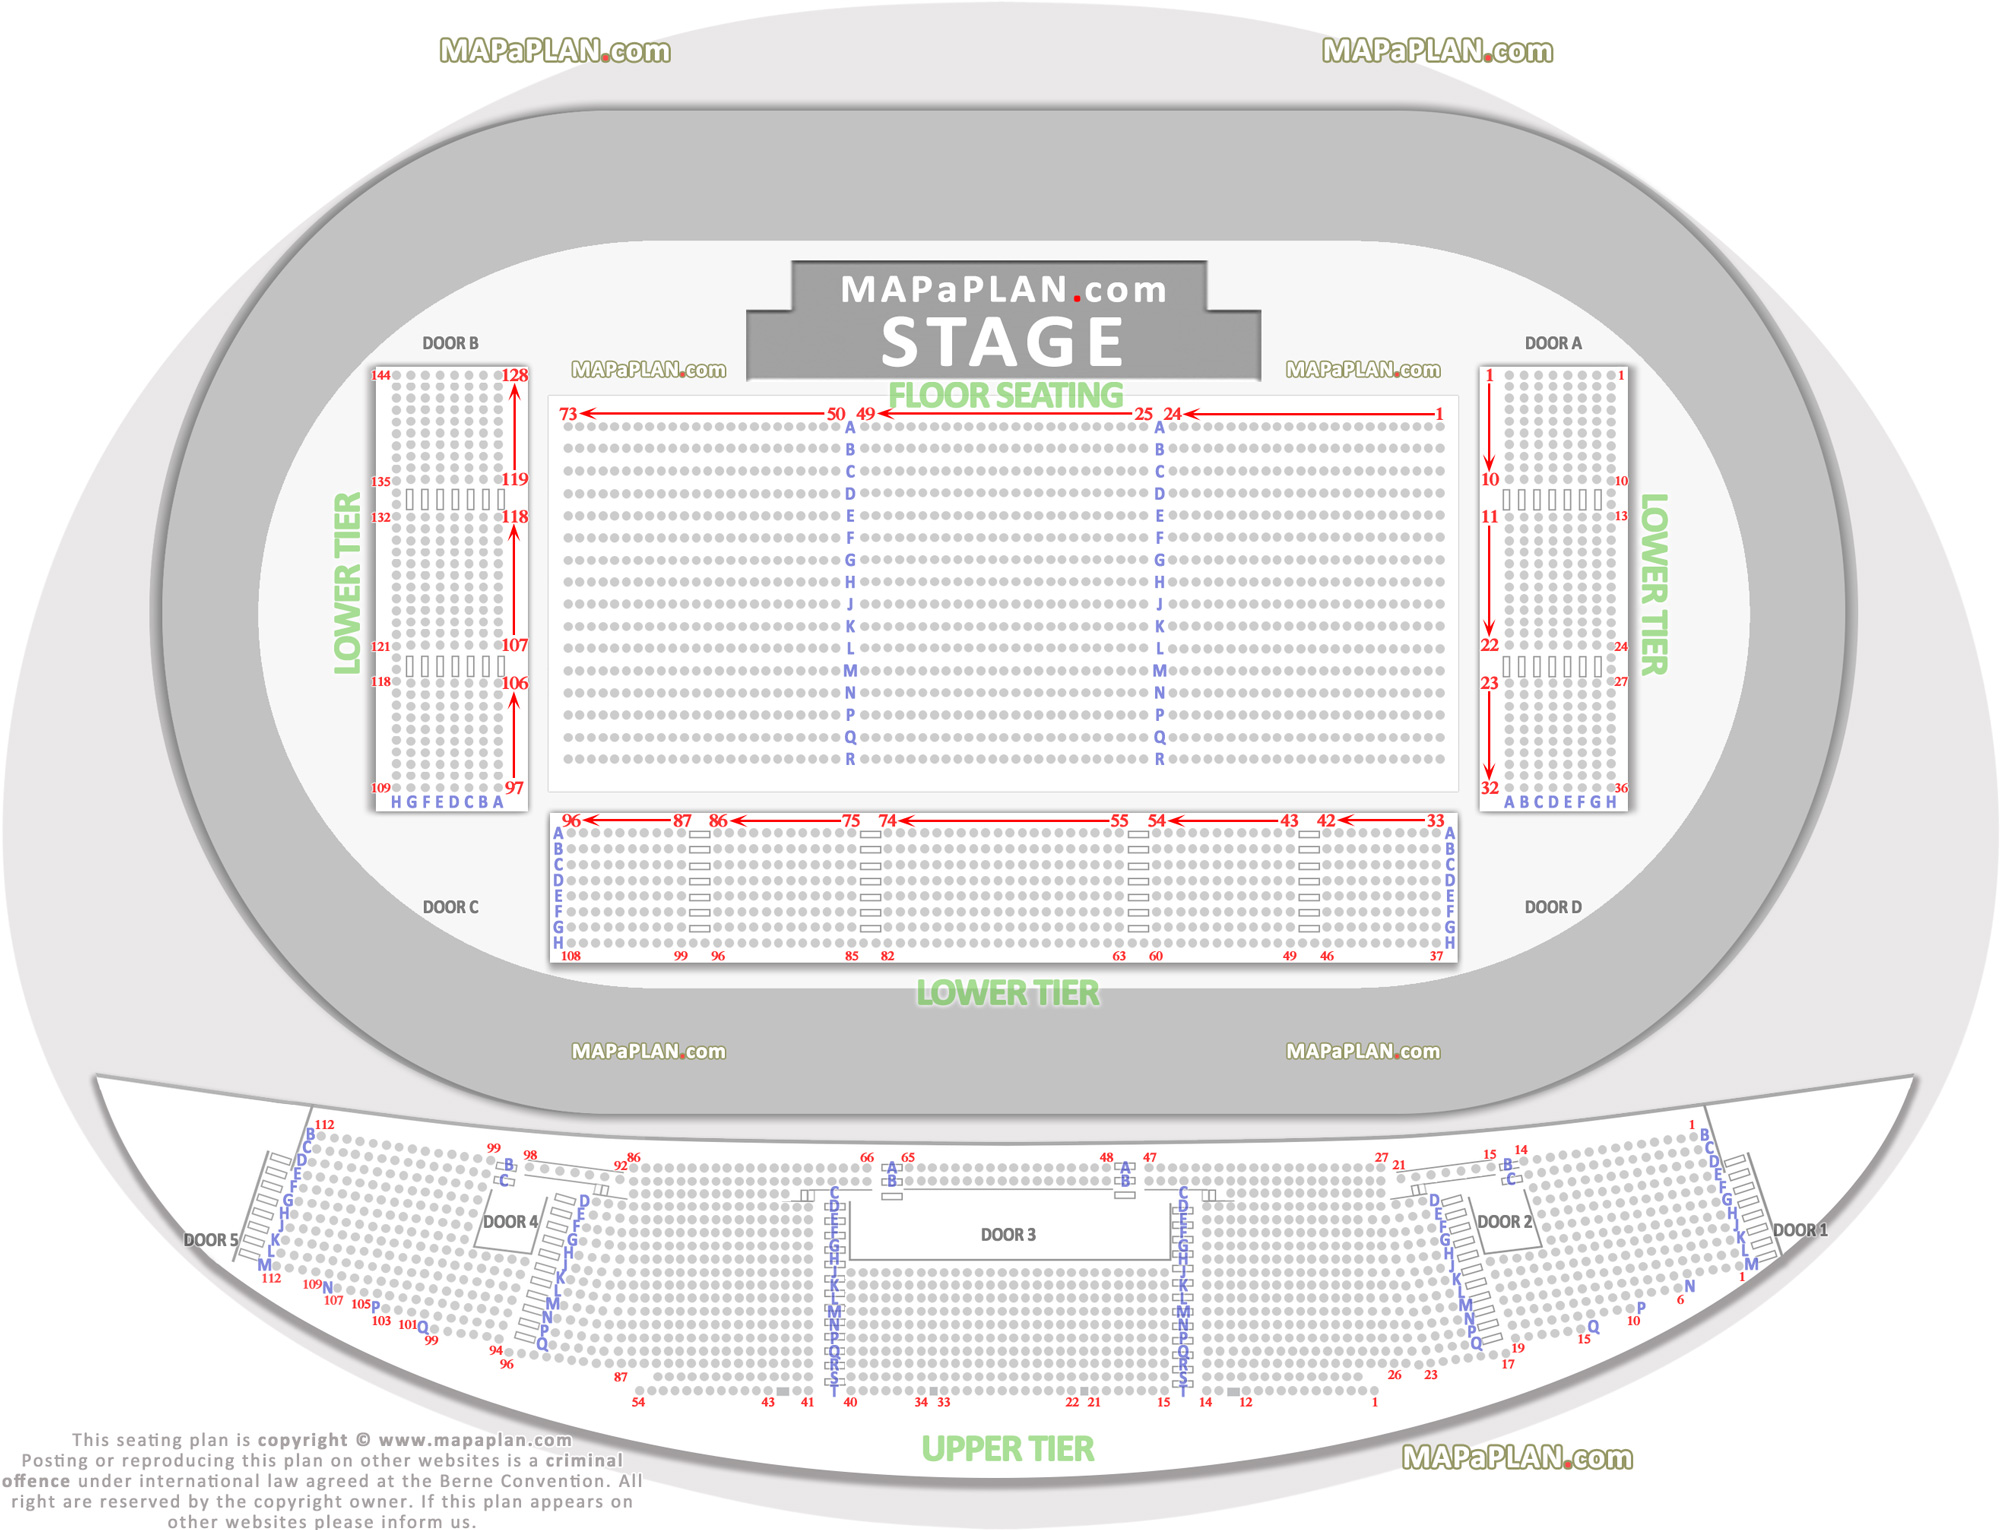 derby-velodrome-arena-seating-plan-01-detailed-seat-row-number-concert-stage-chart-floor-map-lower-upper-tier-block-high-resolution.jpg